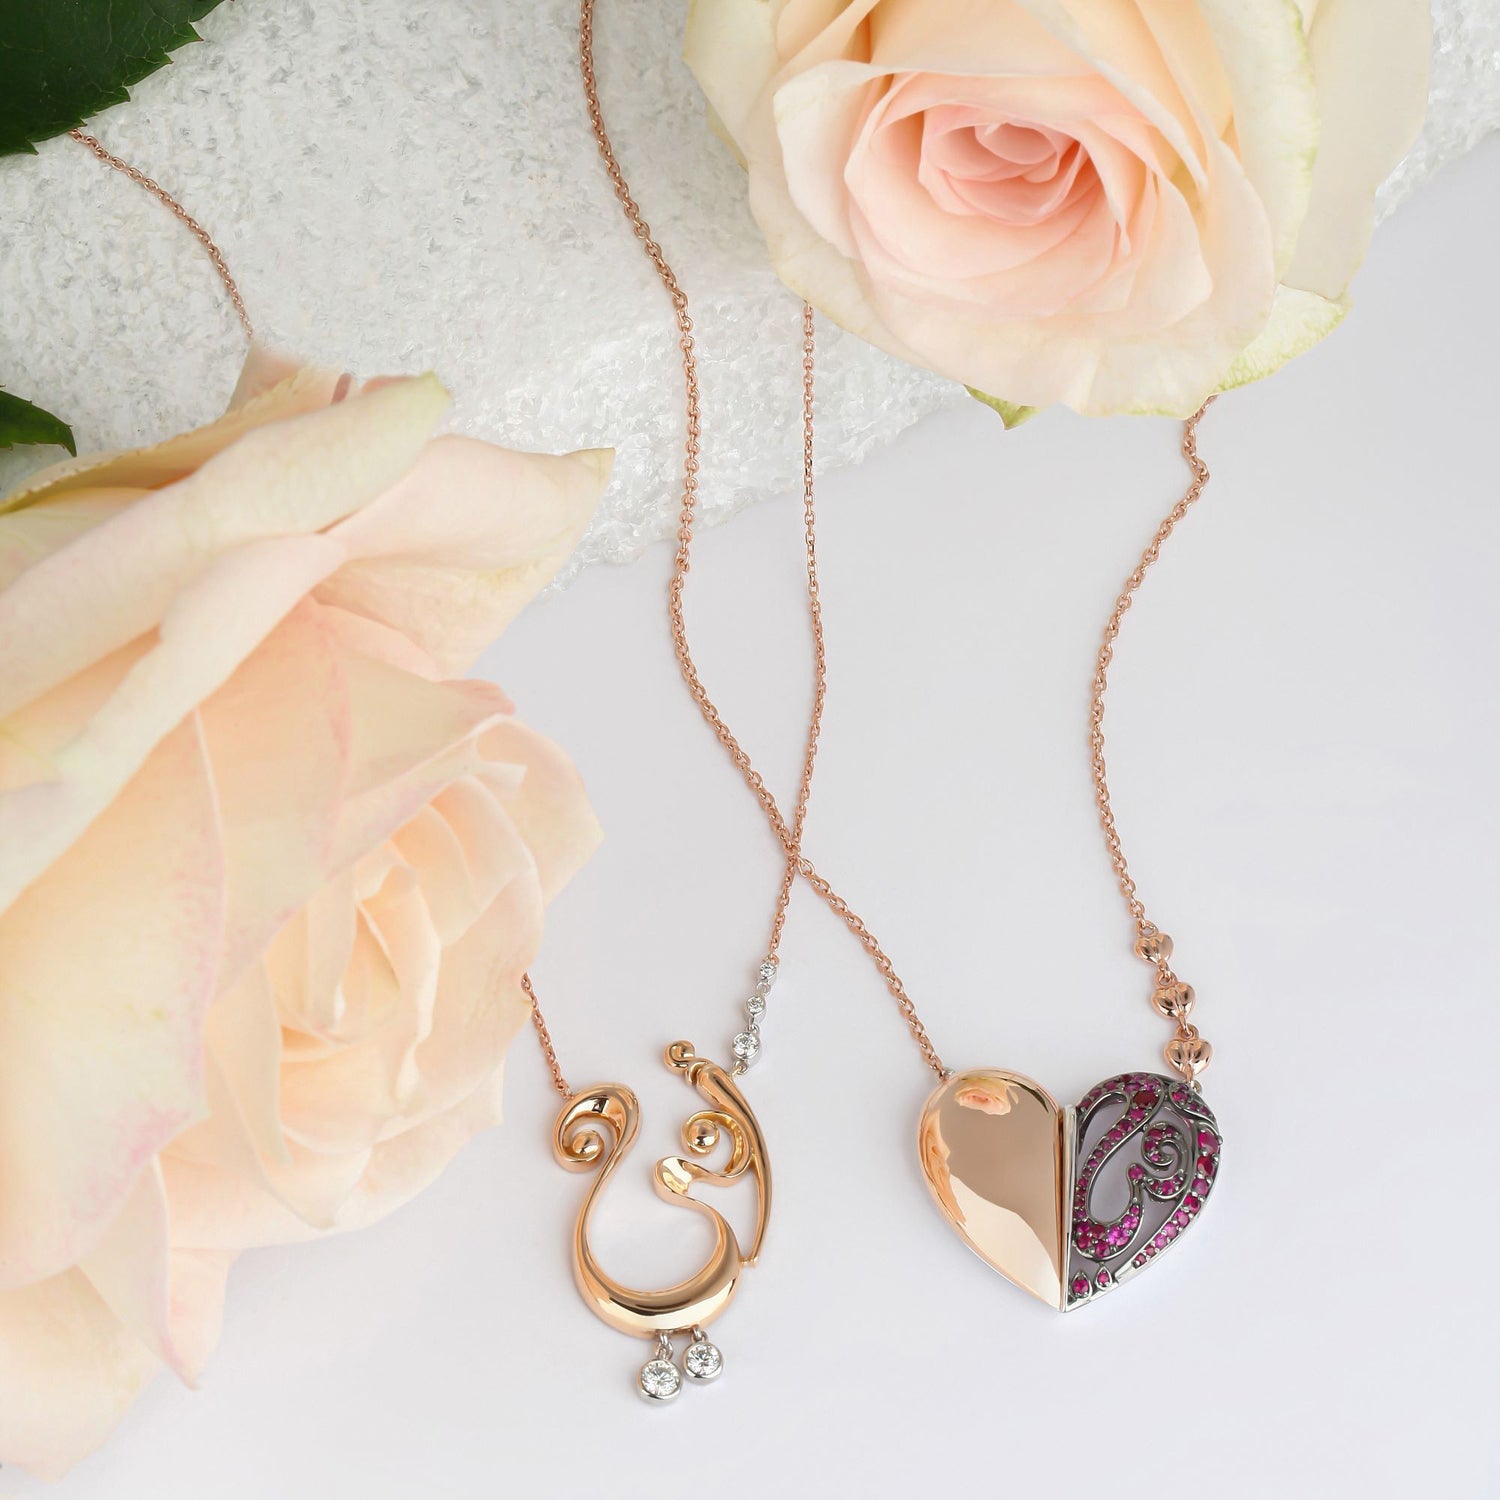 The Mothers' Day Edition - Heart Shaped Custom Arabic Letter "Mother" Rose Gold & Ruby Precious Stones Necklace | Jewellery Necklace